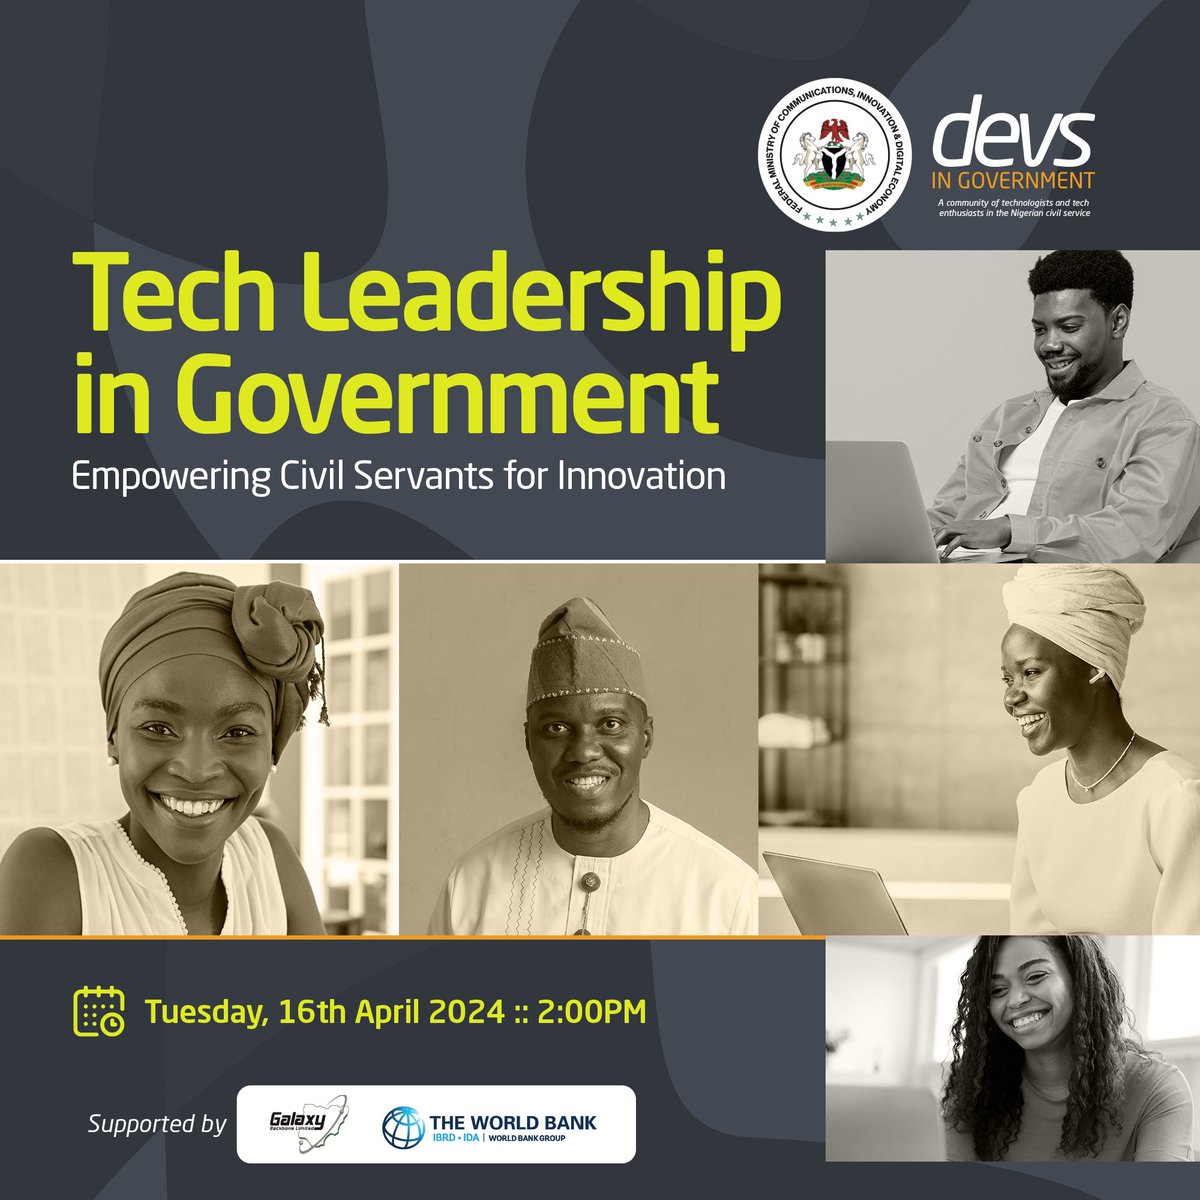 It’s time for another edition of #DevsInGovernment, a community of technologists and tech enthusiasts in the Civil Service actively contributing to and leading digital transformation across government agencies. Register with the link below to join discussions on this month’s…